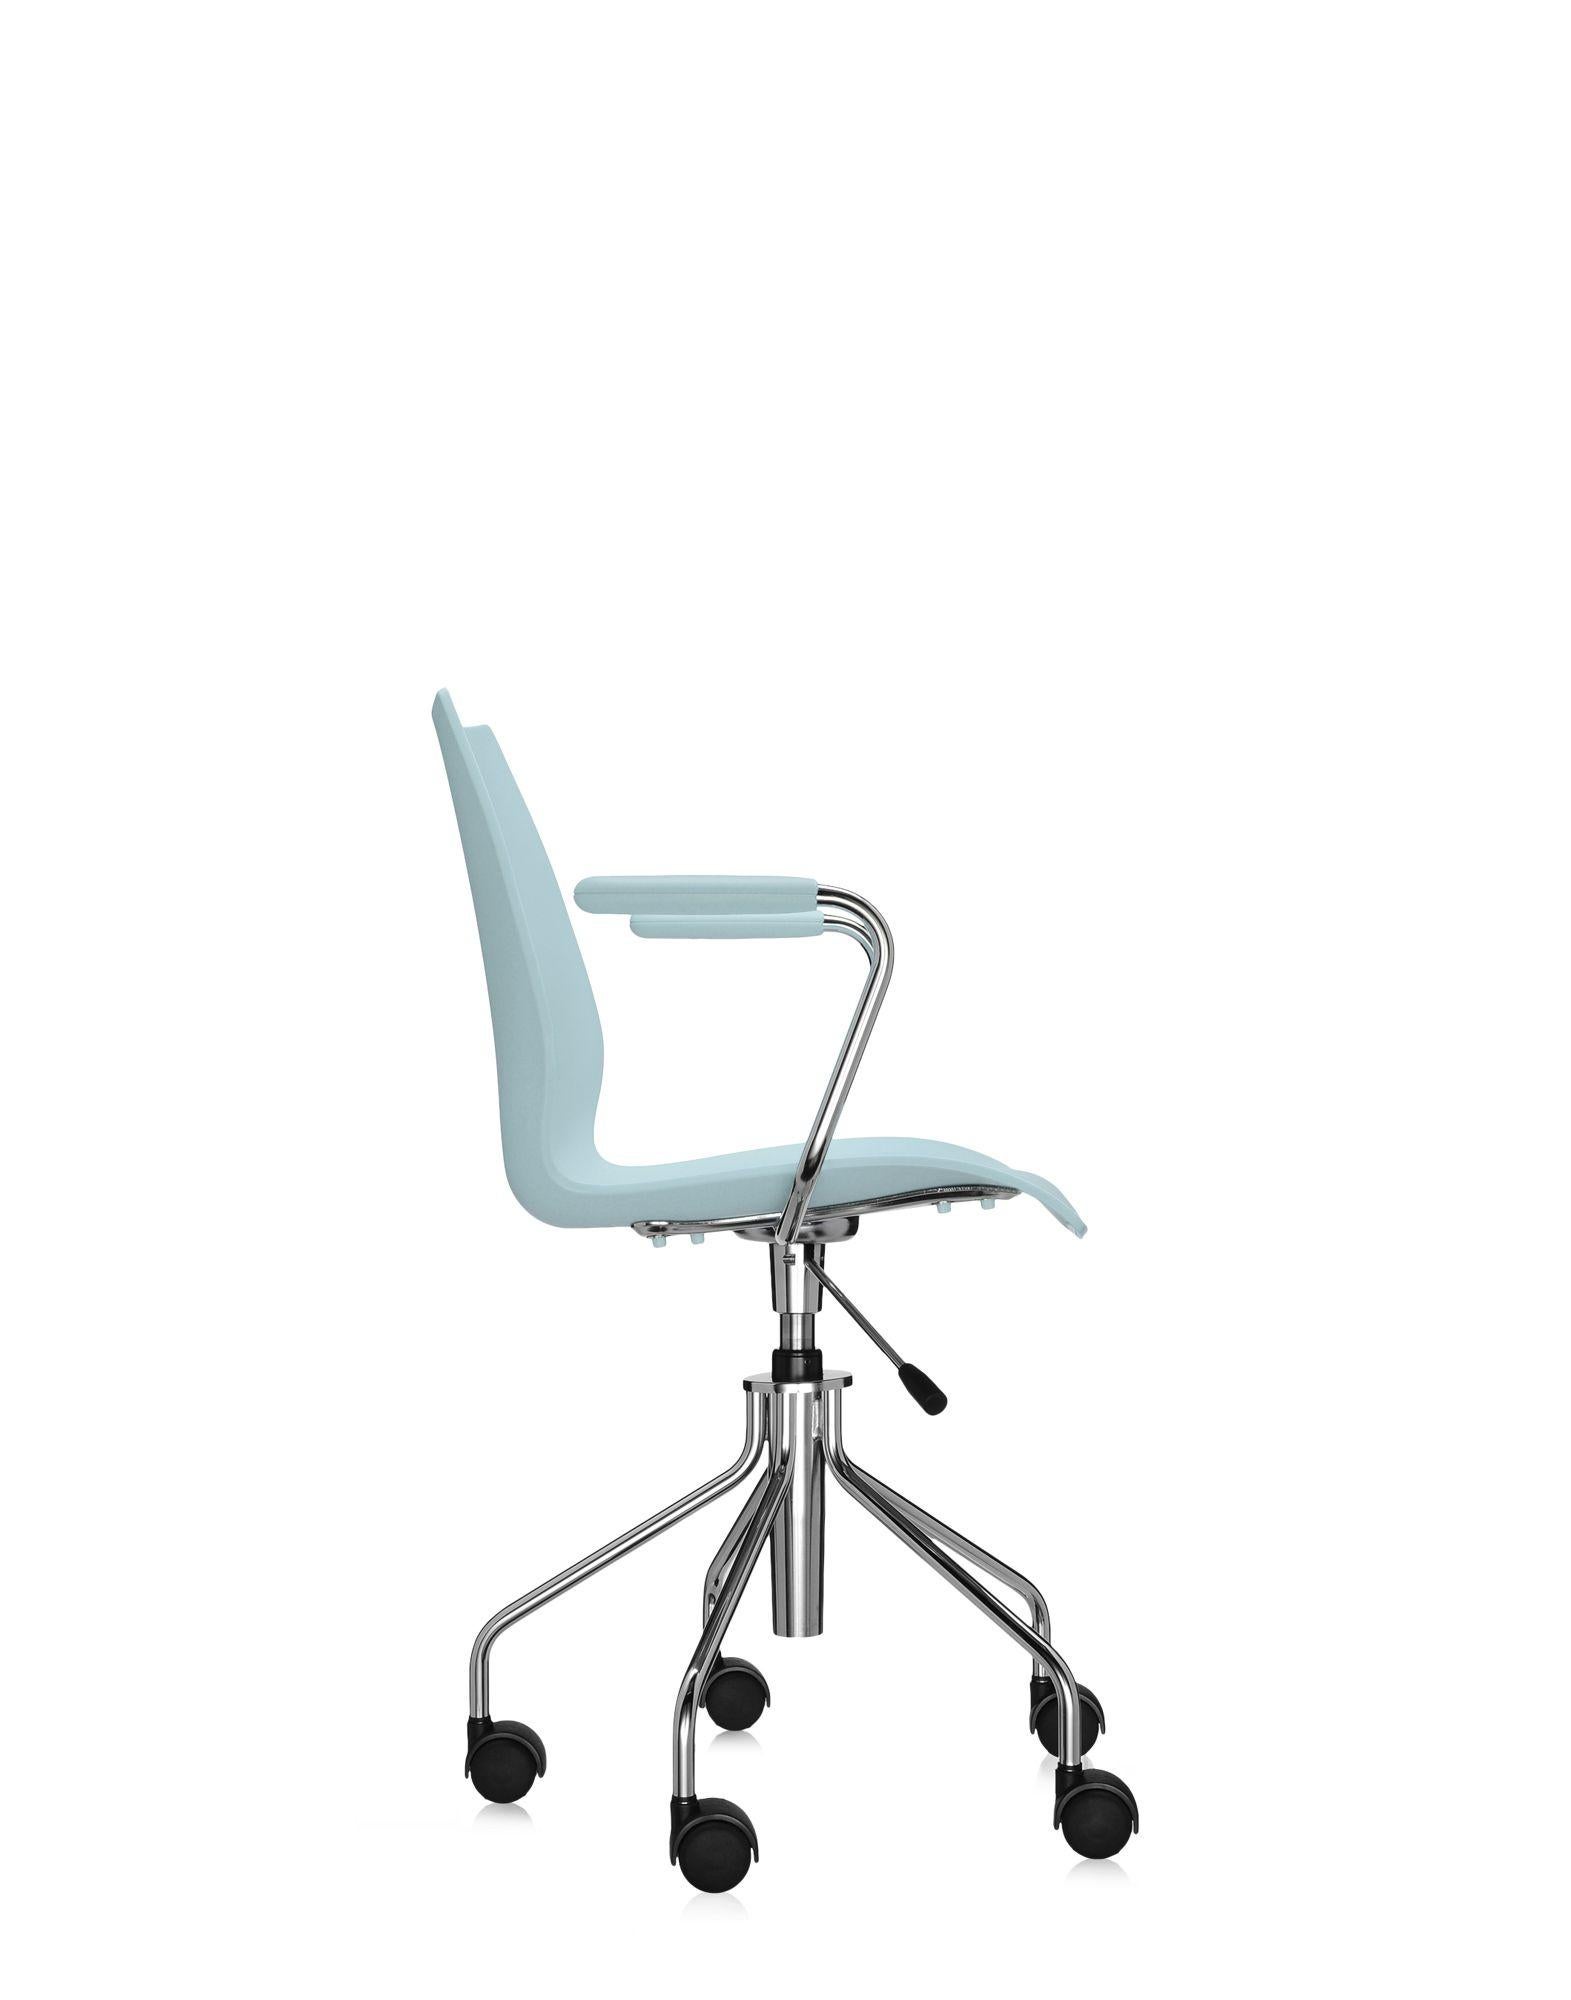 Modern Kartell Maui Swivel Chair Adjustable in Pale Blue by Vico Magistretti